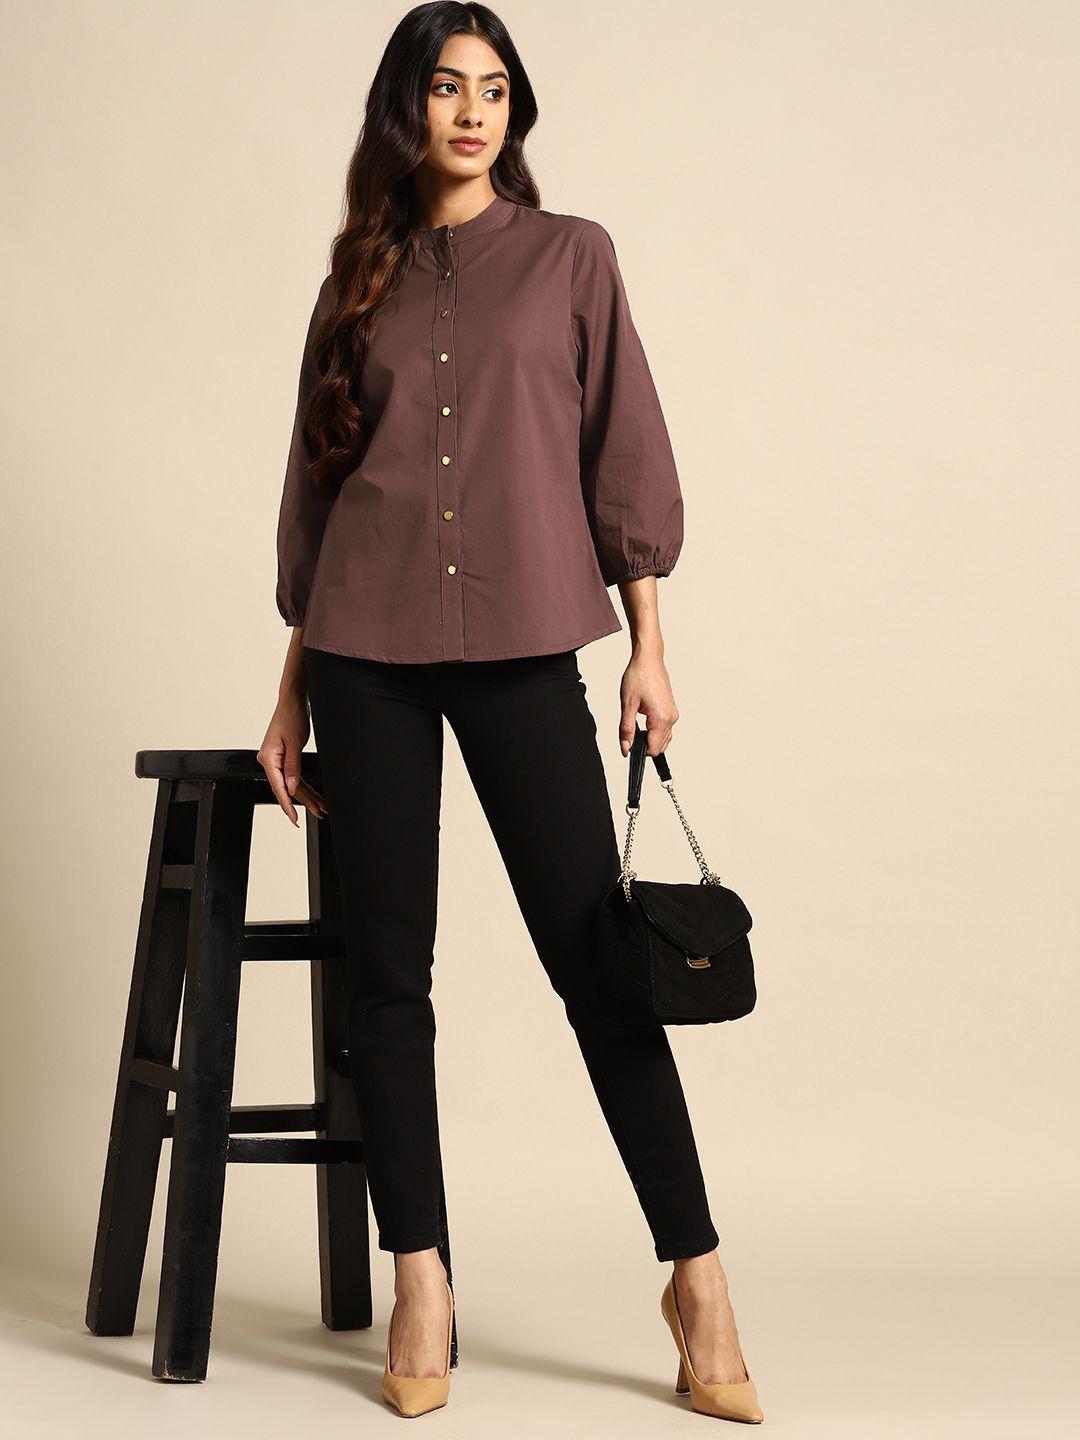 all-about-you-pure-cotton-opaque-casual-shirt